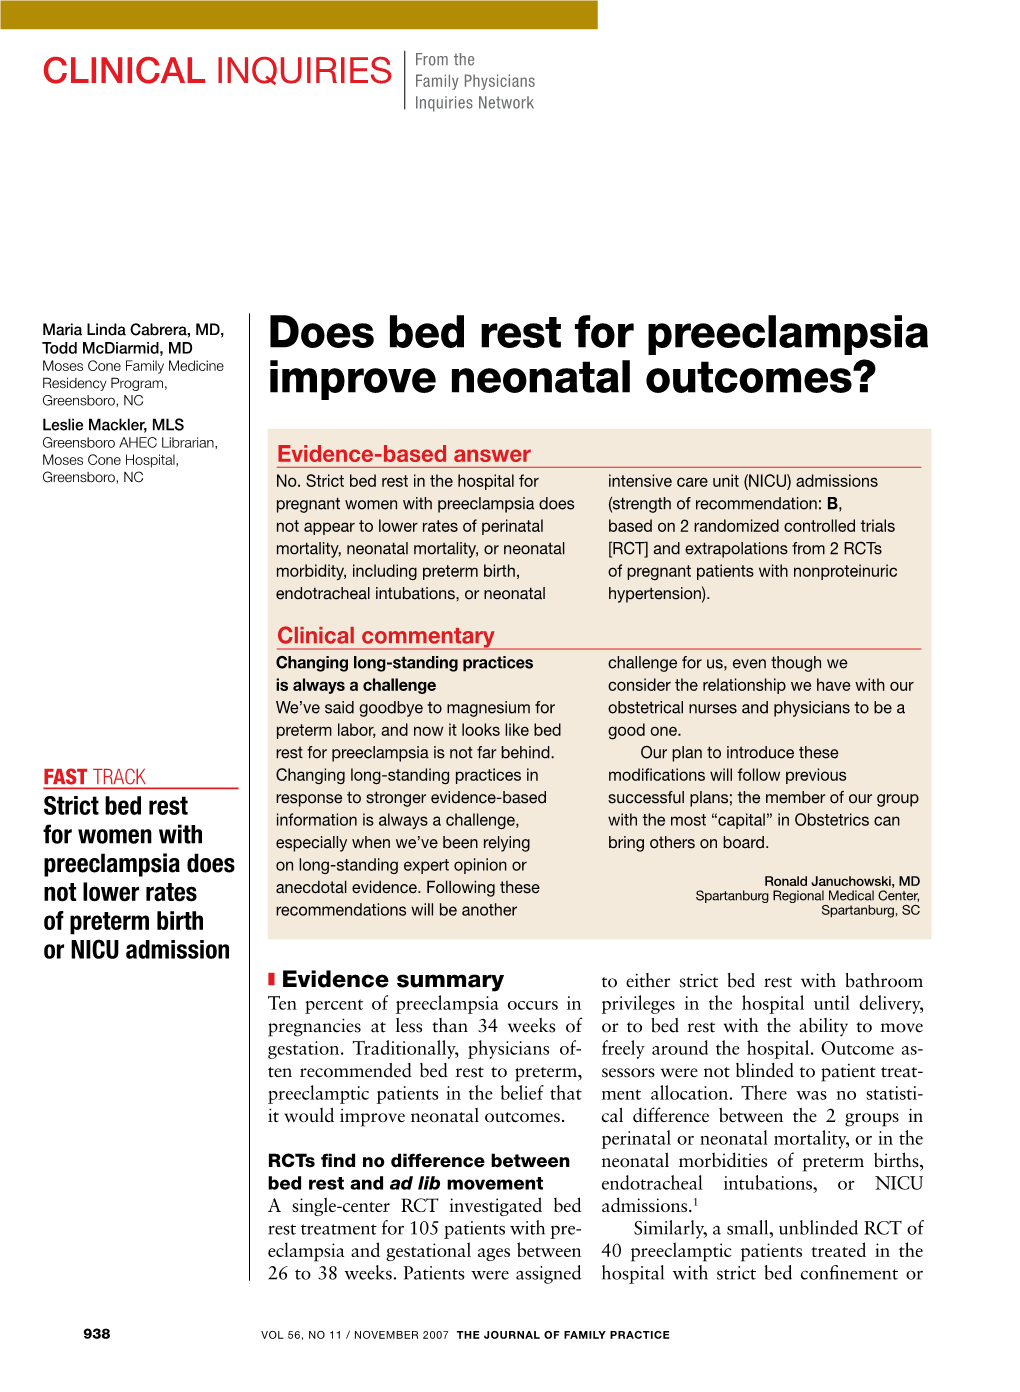 Does Bed Rest for Preeclampsia Improve Neonatal Outcomes?